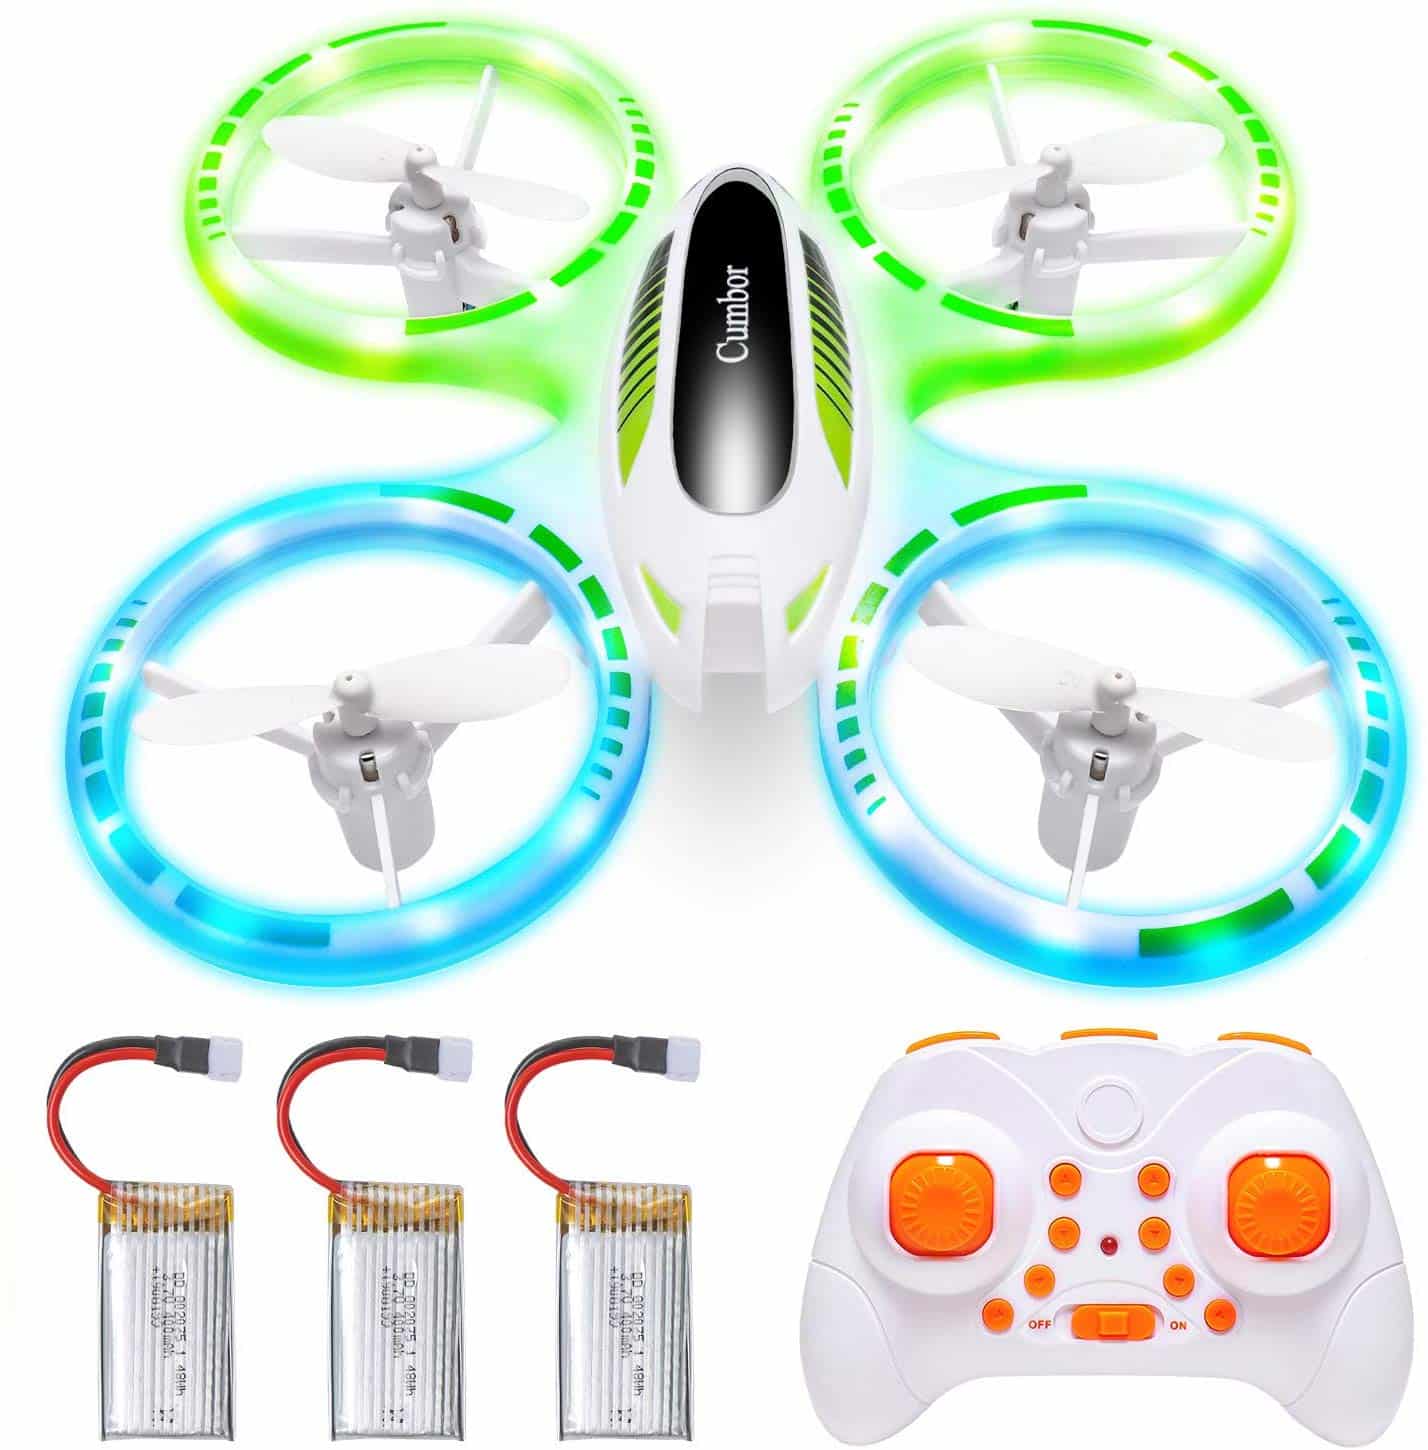 Cumbor Mini Drones for Kids and Beginners, RC Helicopter Quadcopter $19.99 (REG $41.00)